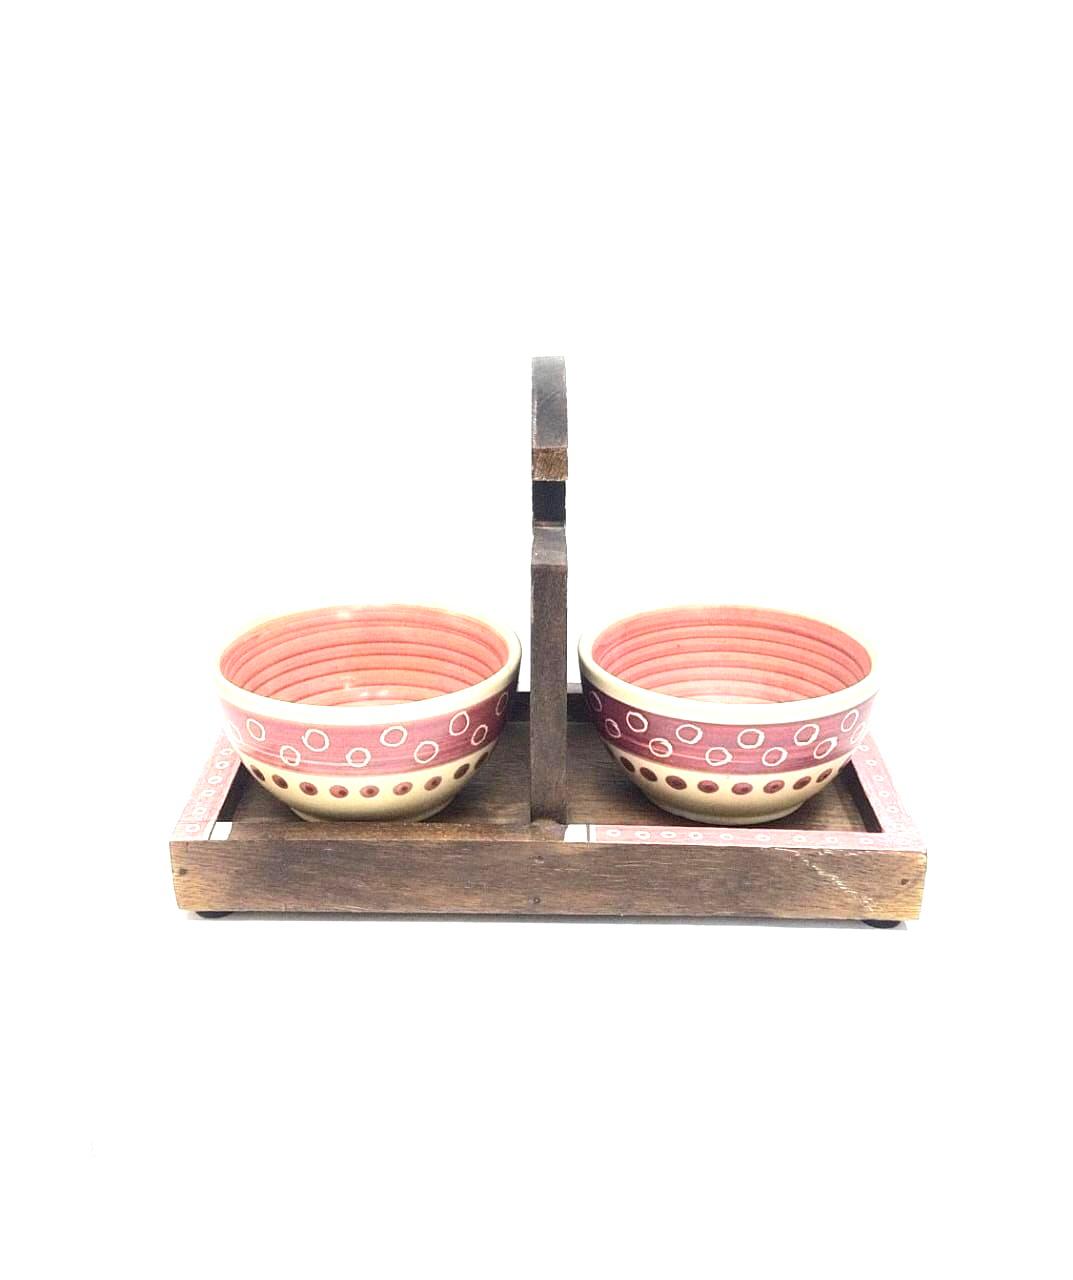 Luxurious Kitchenware Two Ceramic Bowls On Serving Stand By Tamrapatra